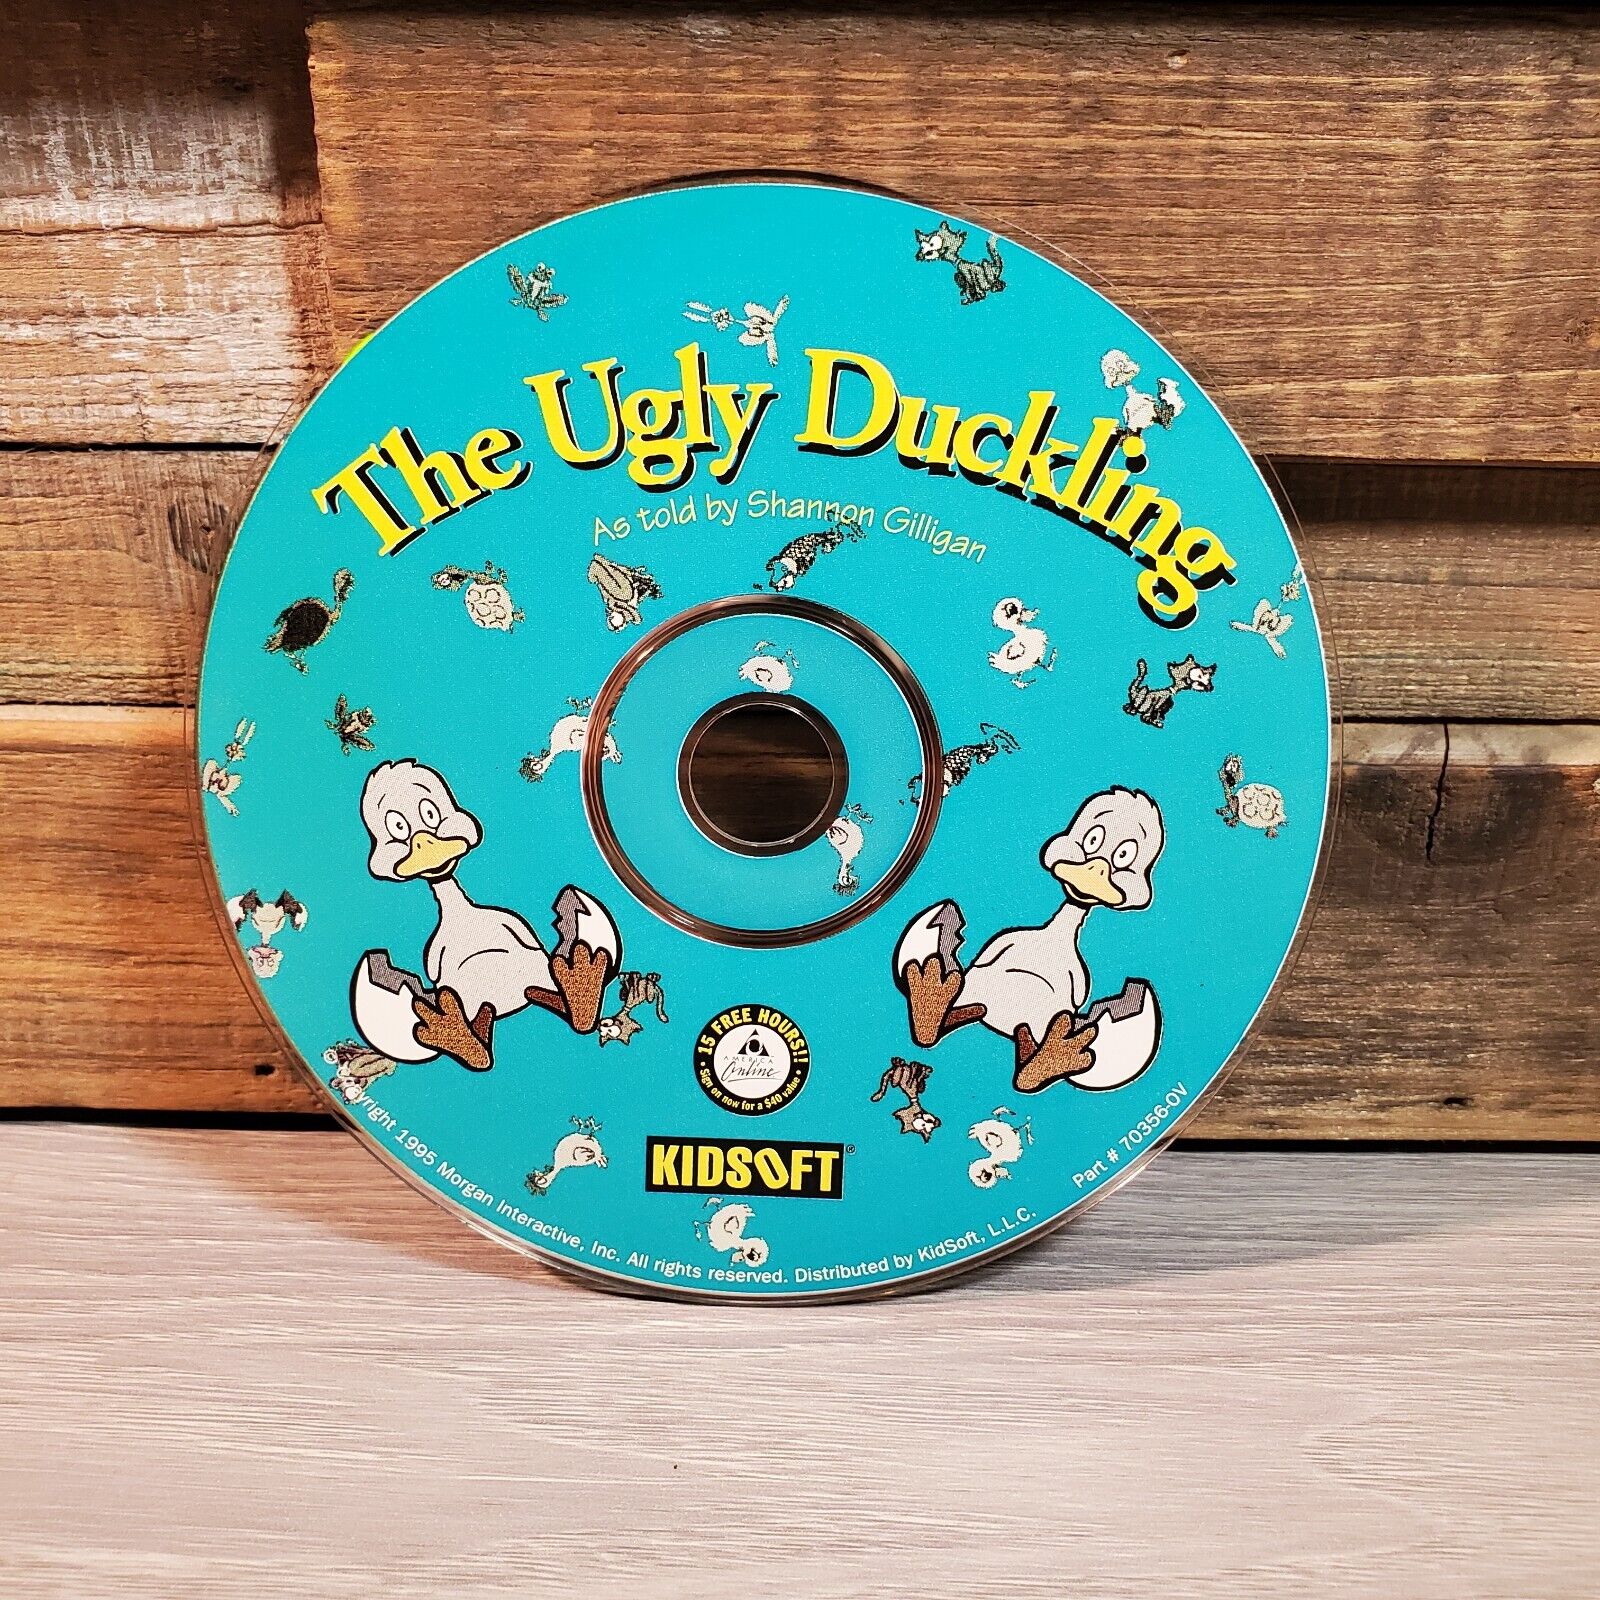 The Ugly Duckling Shannon Gilligan CD-ROM Kidsoft Rare 1995  Disc Only Homeschoo